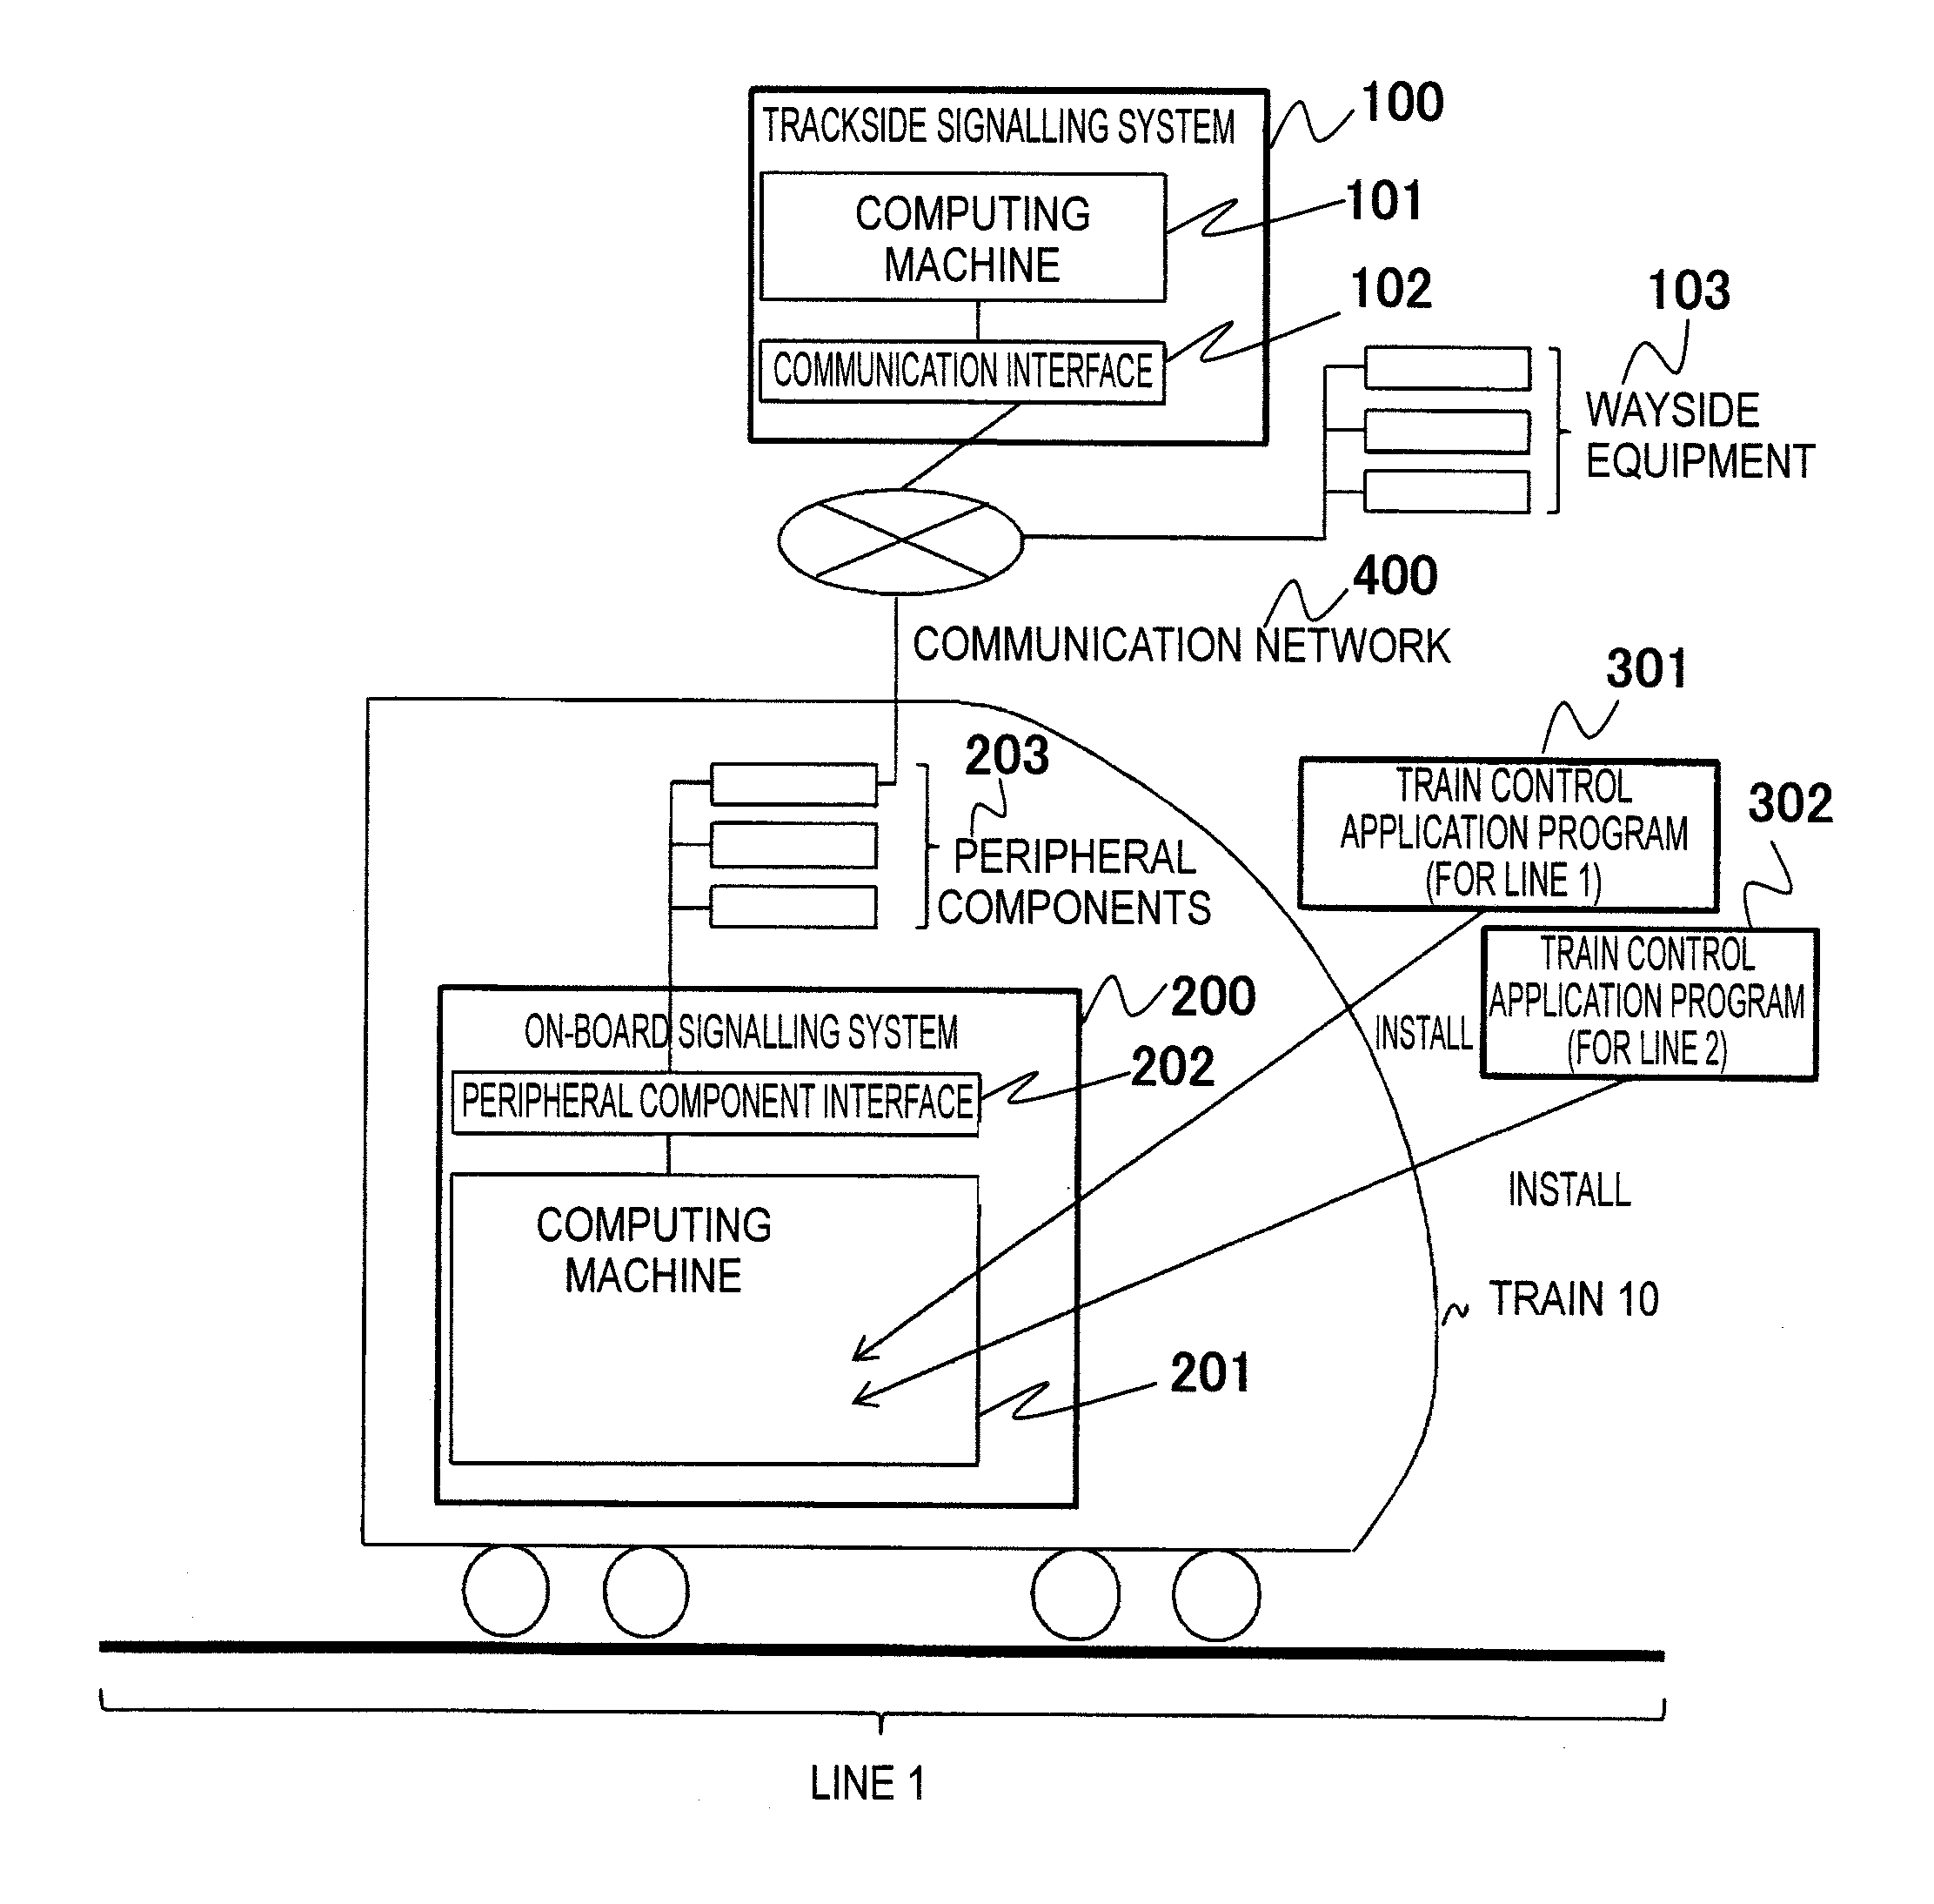 Railway signalling system and on-board signalling system